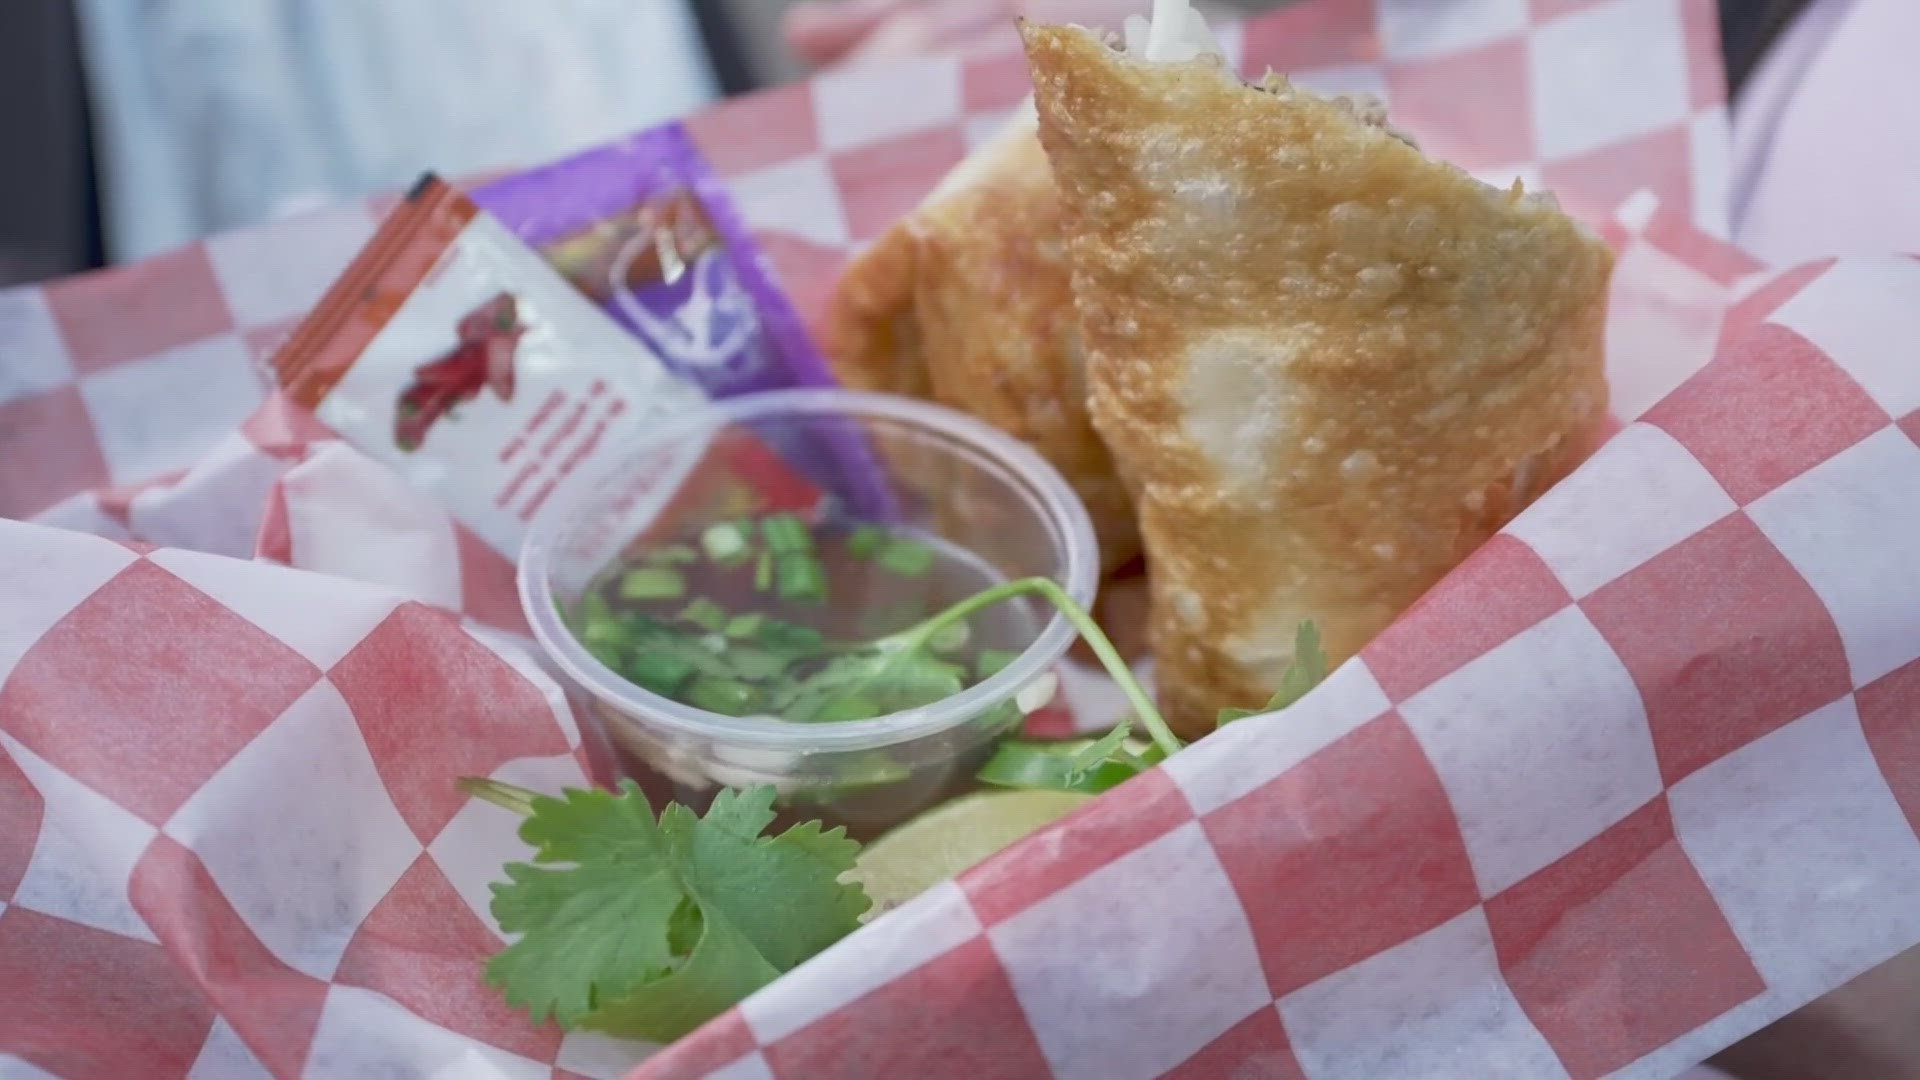 Michelle Le and her family have been serving fairgoers since 2011. This year, they are introducing the deep fried pho, a Big Tex Choice winner.